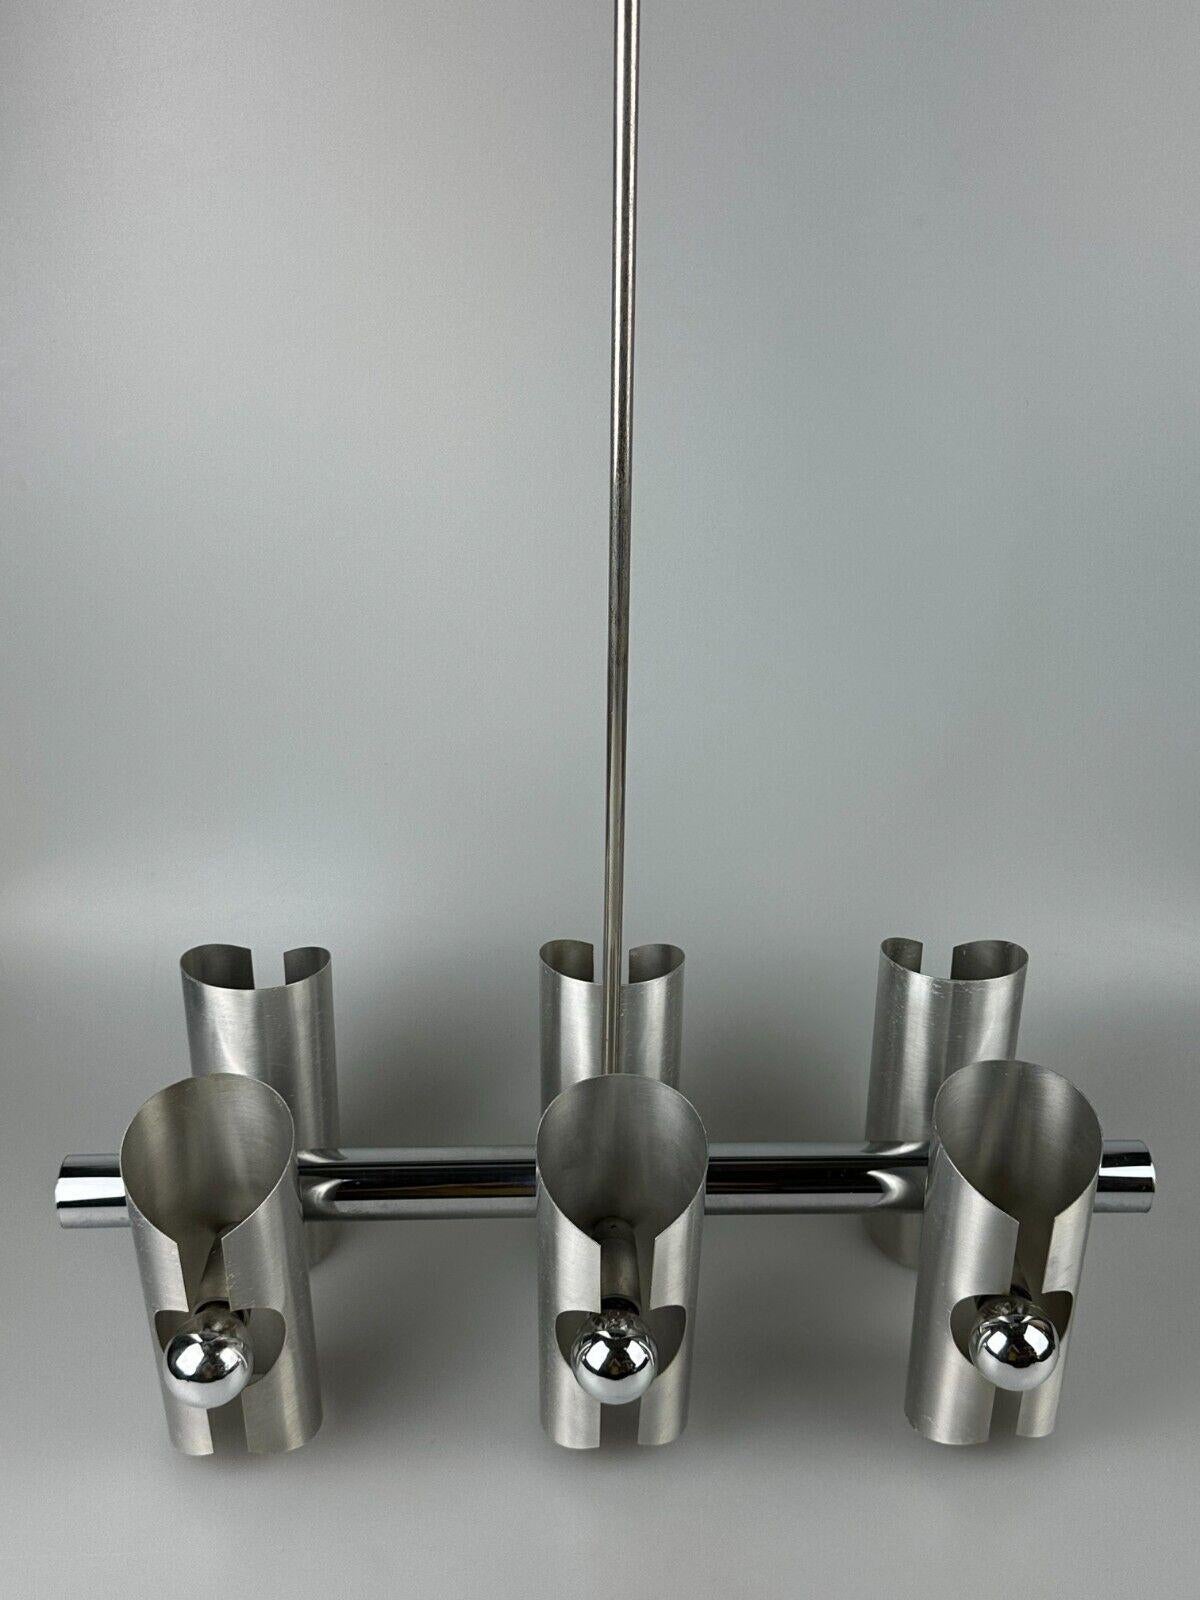 60's 70's 6 Light Sputnik Chandelier Metal Chrome Space Age Design In Good Condition For Sale In Neuenkirchen, NI